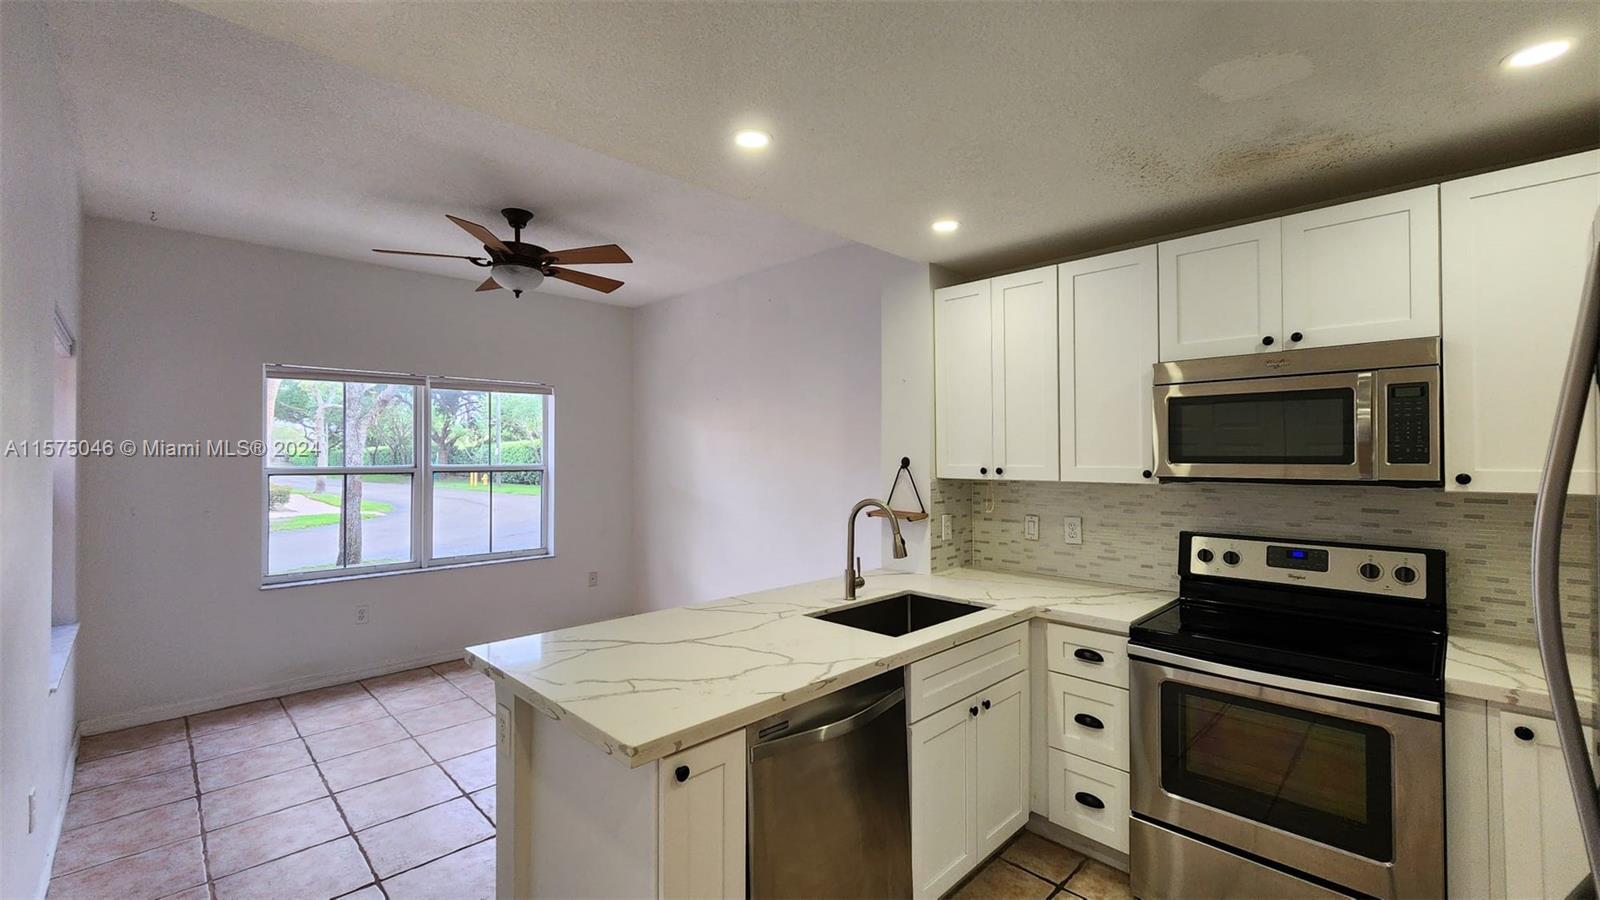 8531 NW 139th Ter, Miami Lakes, Florida 33016, 3 Bedrooms Bedrooms, ,2 BathroomsBathrooms,Residential,For Sale,8531 NW 139th Ter,A11575046